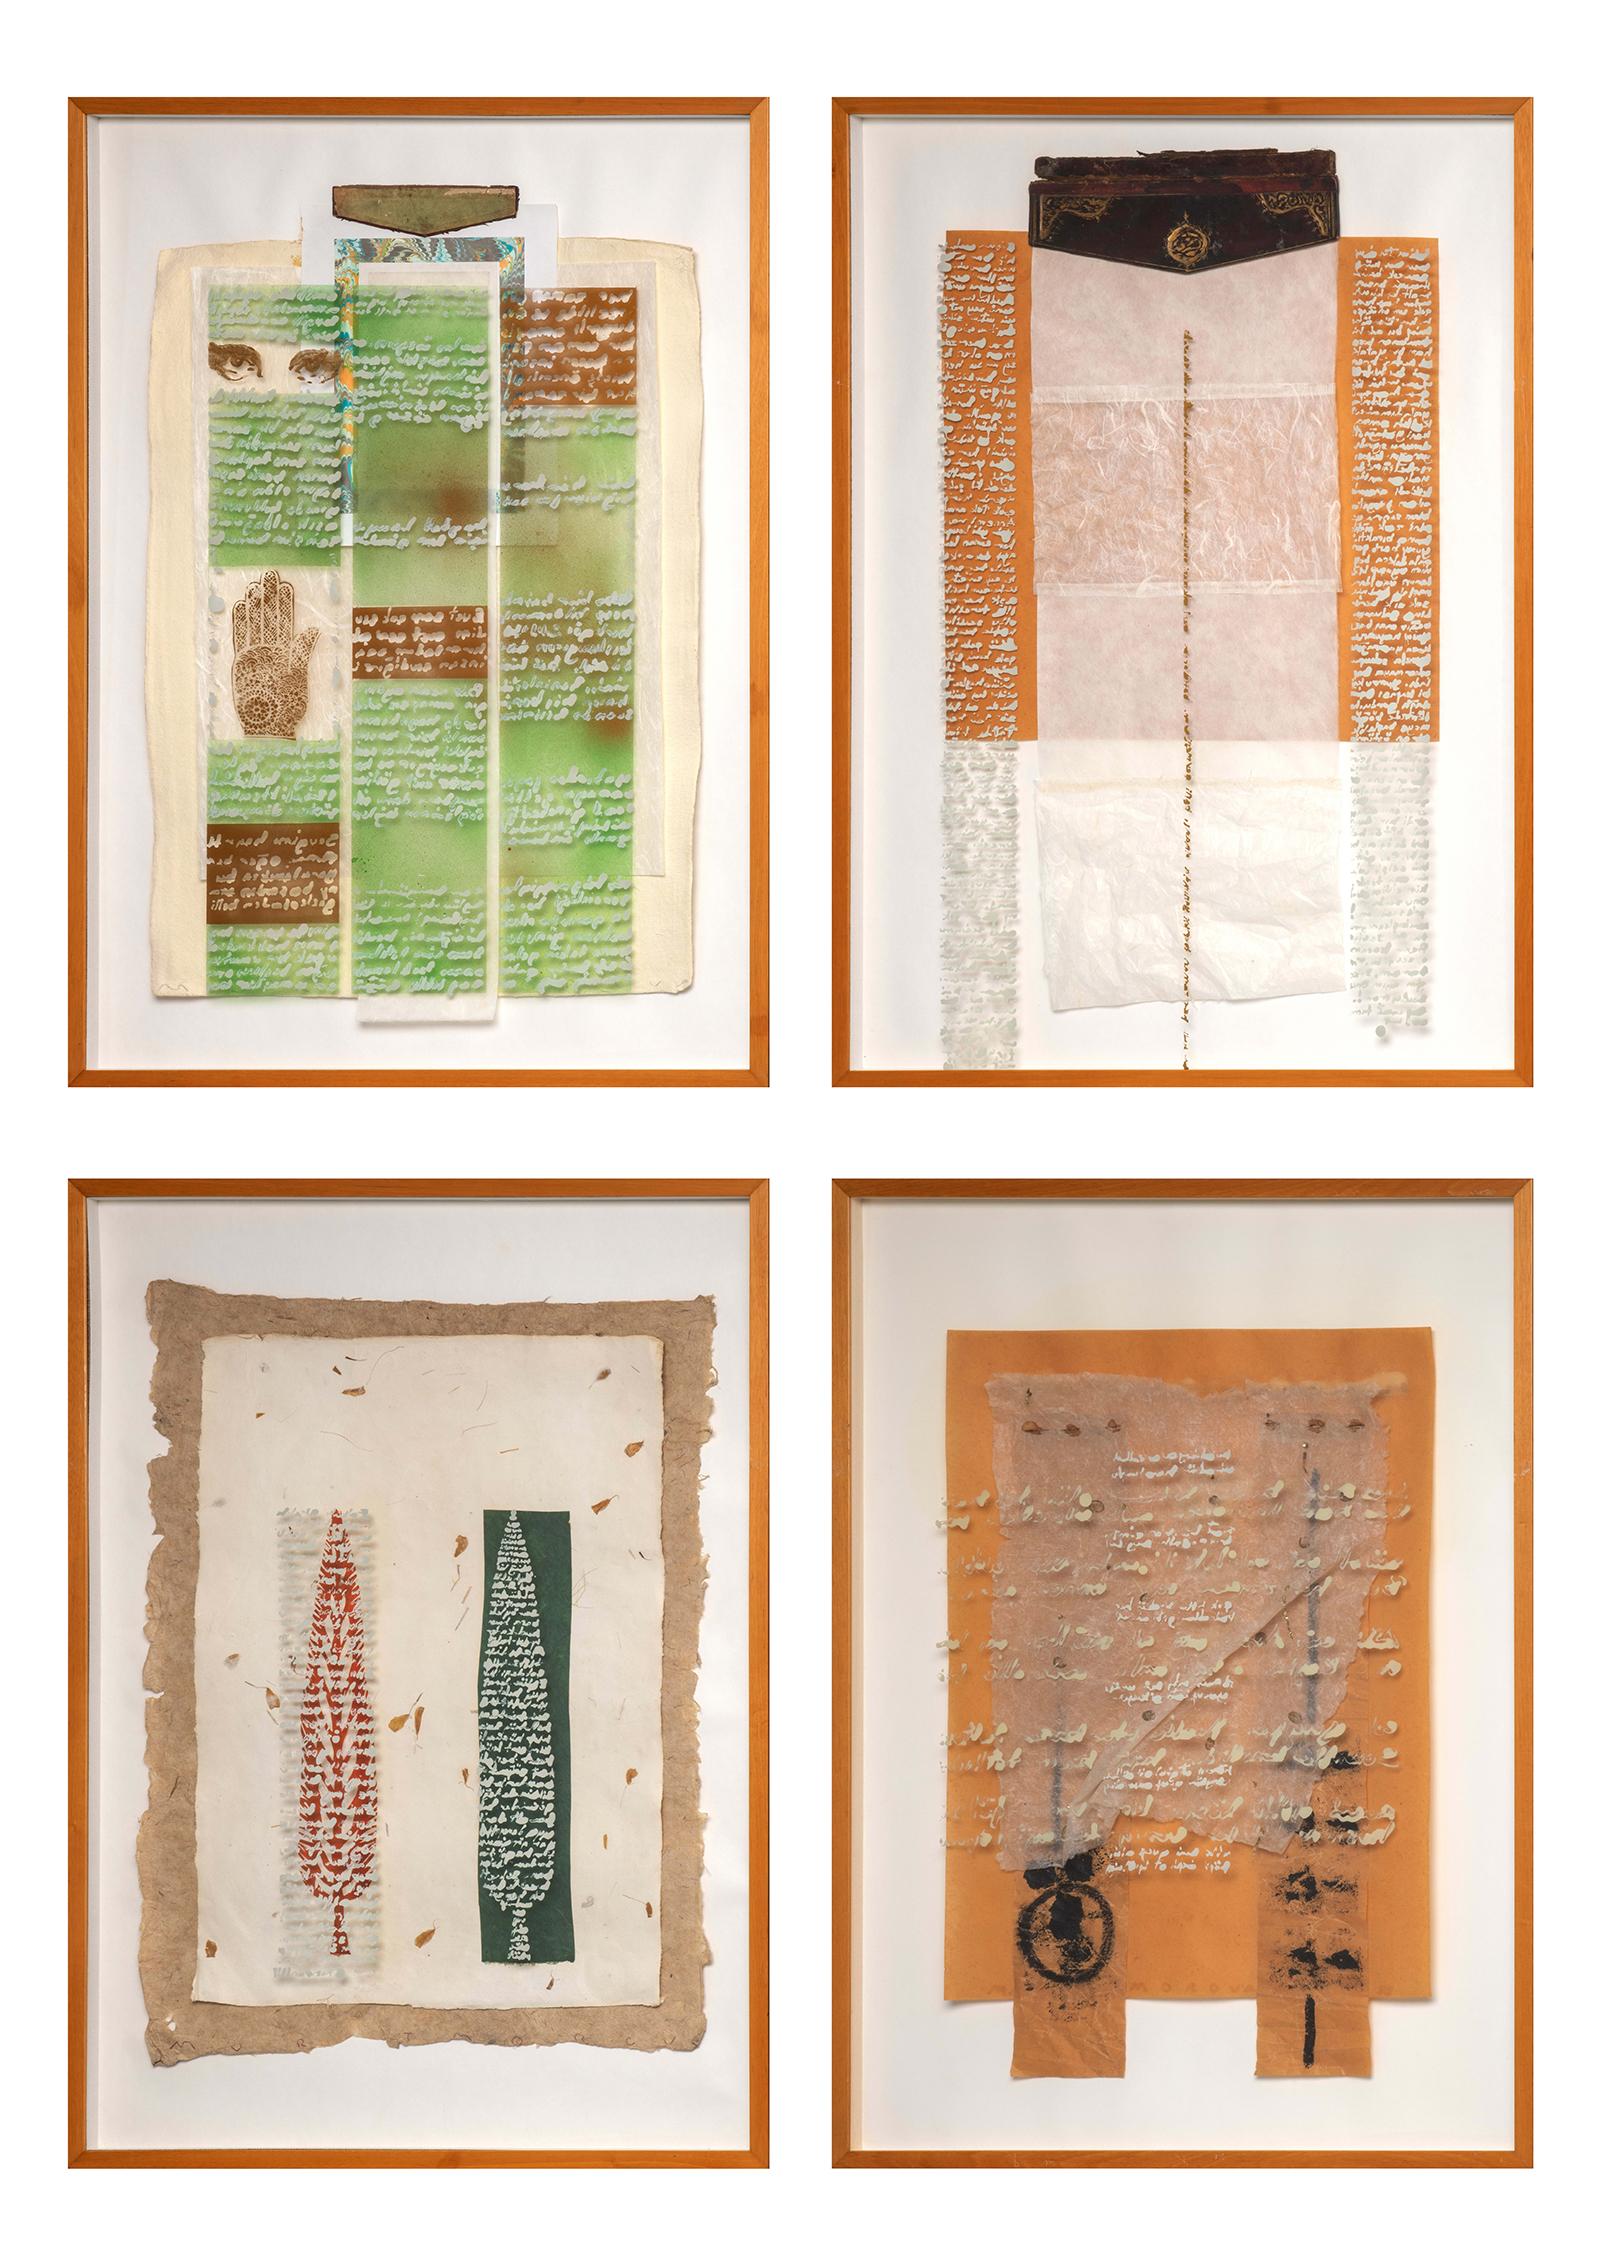 Shipping costs on request
size per piece 88cm x 57cm
Murat Morova "Dil + Suret Composition" set of four.
Gouache and mixed media art work collage.
Hand-made paper, book cover, paint and glass.
Ready-to-hang including frame.
The Turkish writings are